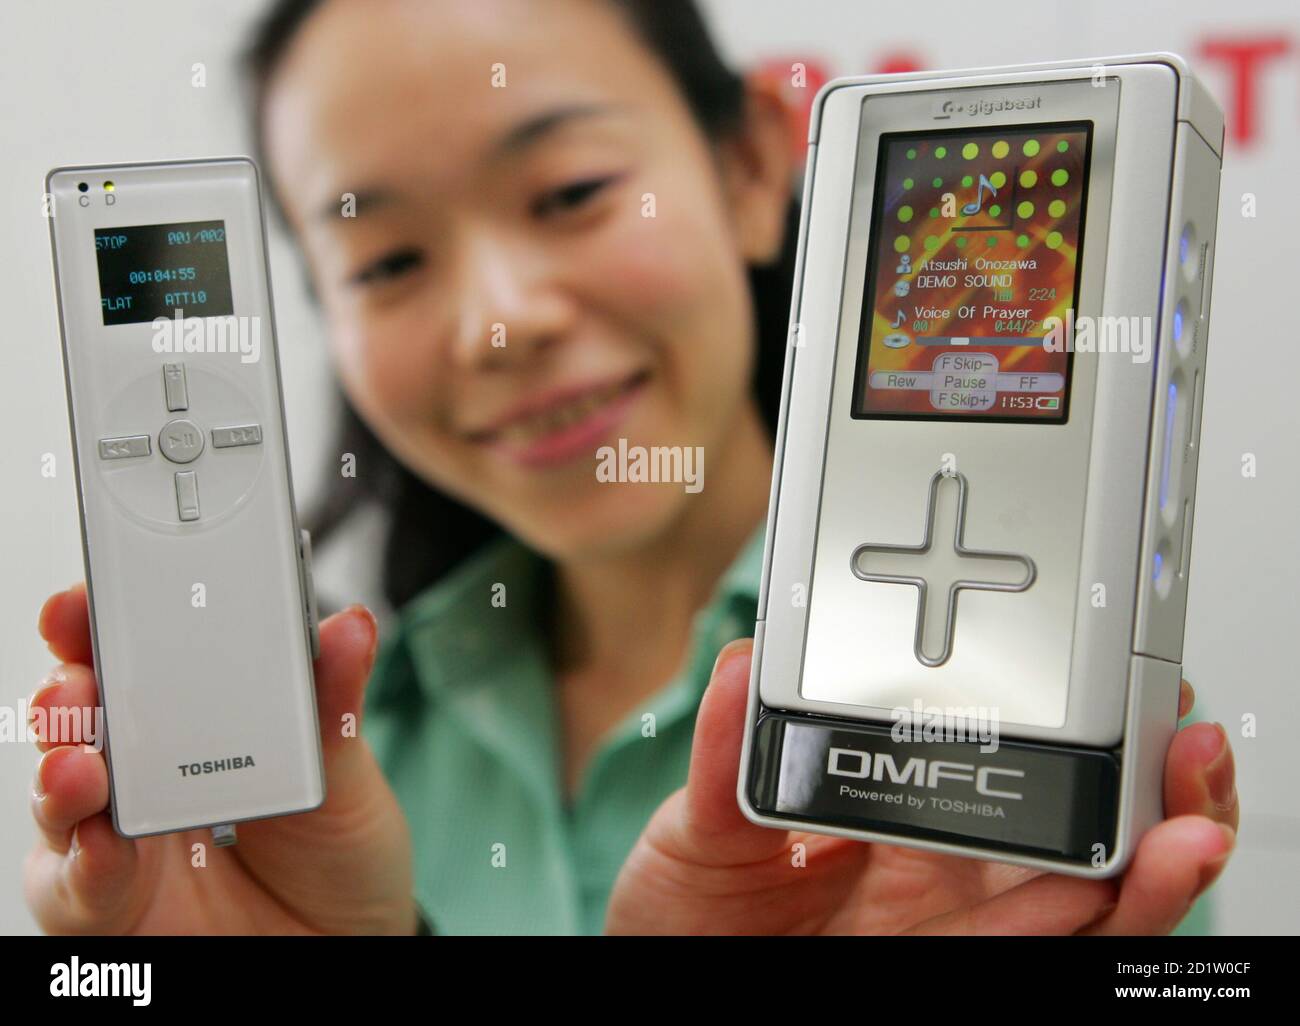 Toshiba employee shows off the company's prototype of direct methanol fuel cell powered audio player in Tokyo.  An employee of Toshiba Corporation shows off the company developed prototype of direct methanol fuel cell (DMFC) powered HDD-based digital audio player (R) and a prototype flash memory-based player at the Toshiba headquarters in Tokyo September 16, 2005. The HDD player can run for approximately 60 hours on a single 10ml charge of pure methanol and the flash-memory player runs for 35 hours on a single 3.5ml charge. The DMFC units can be integrated into devices for digital audio player Stock Photo